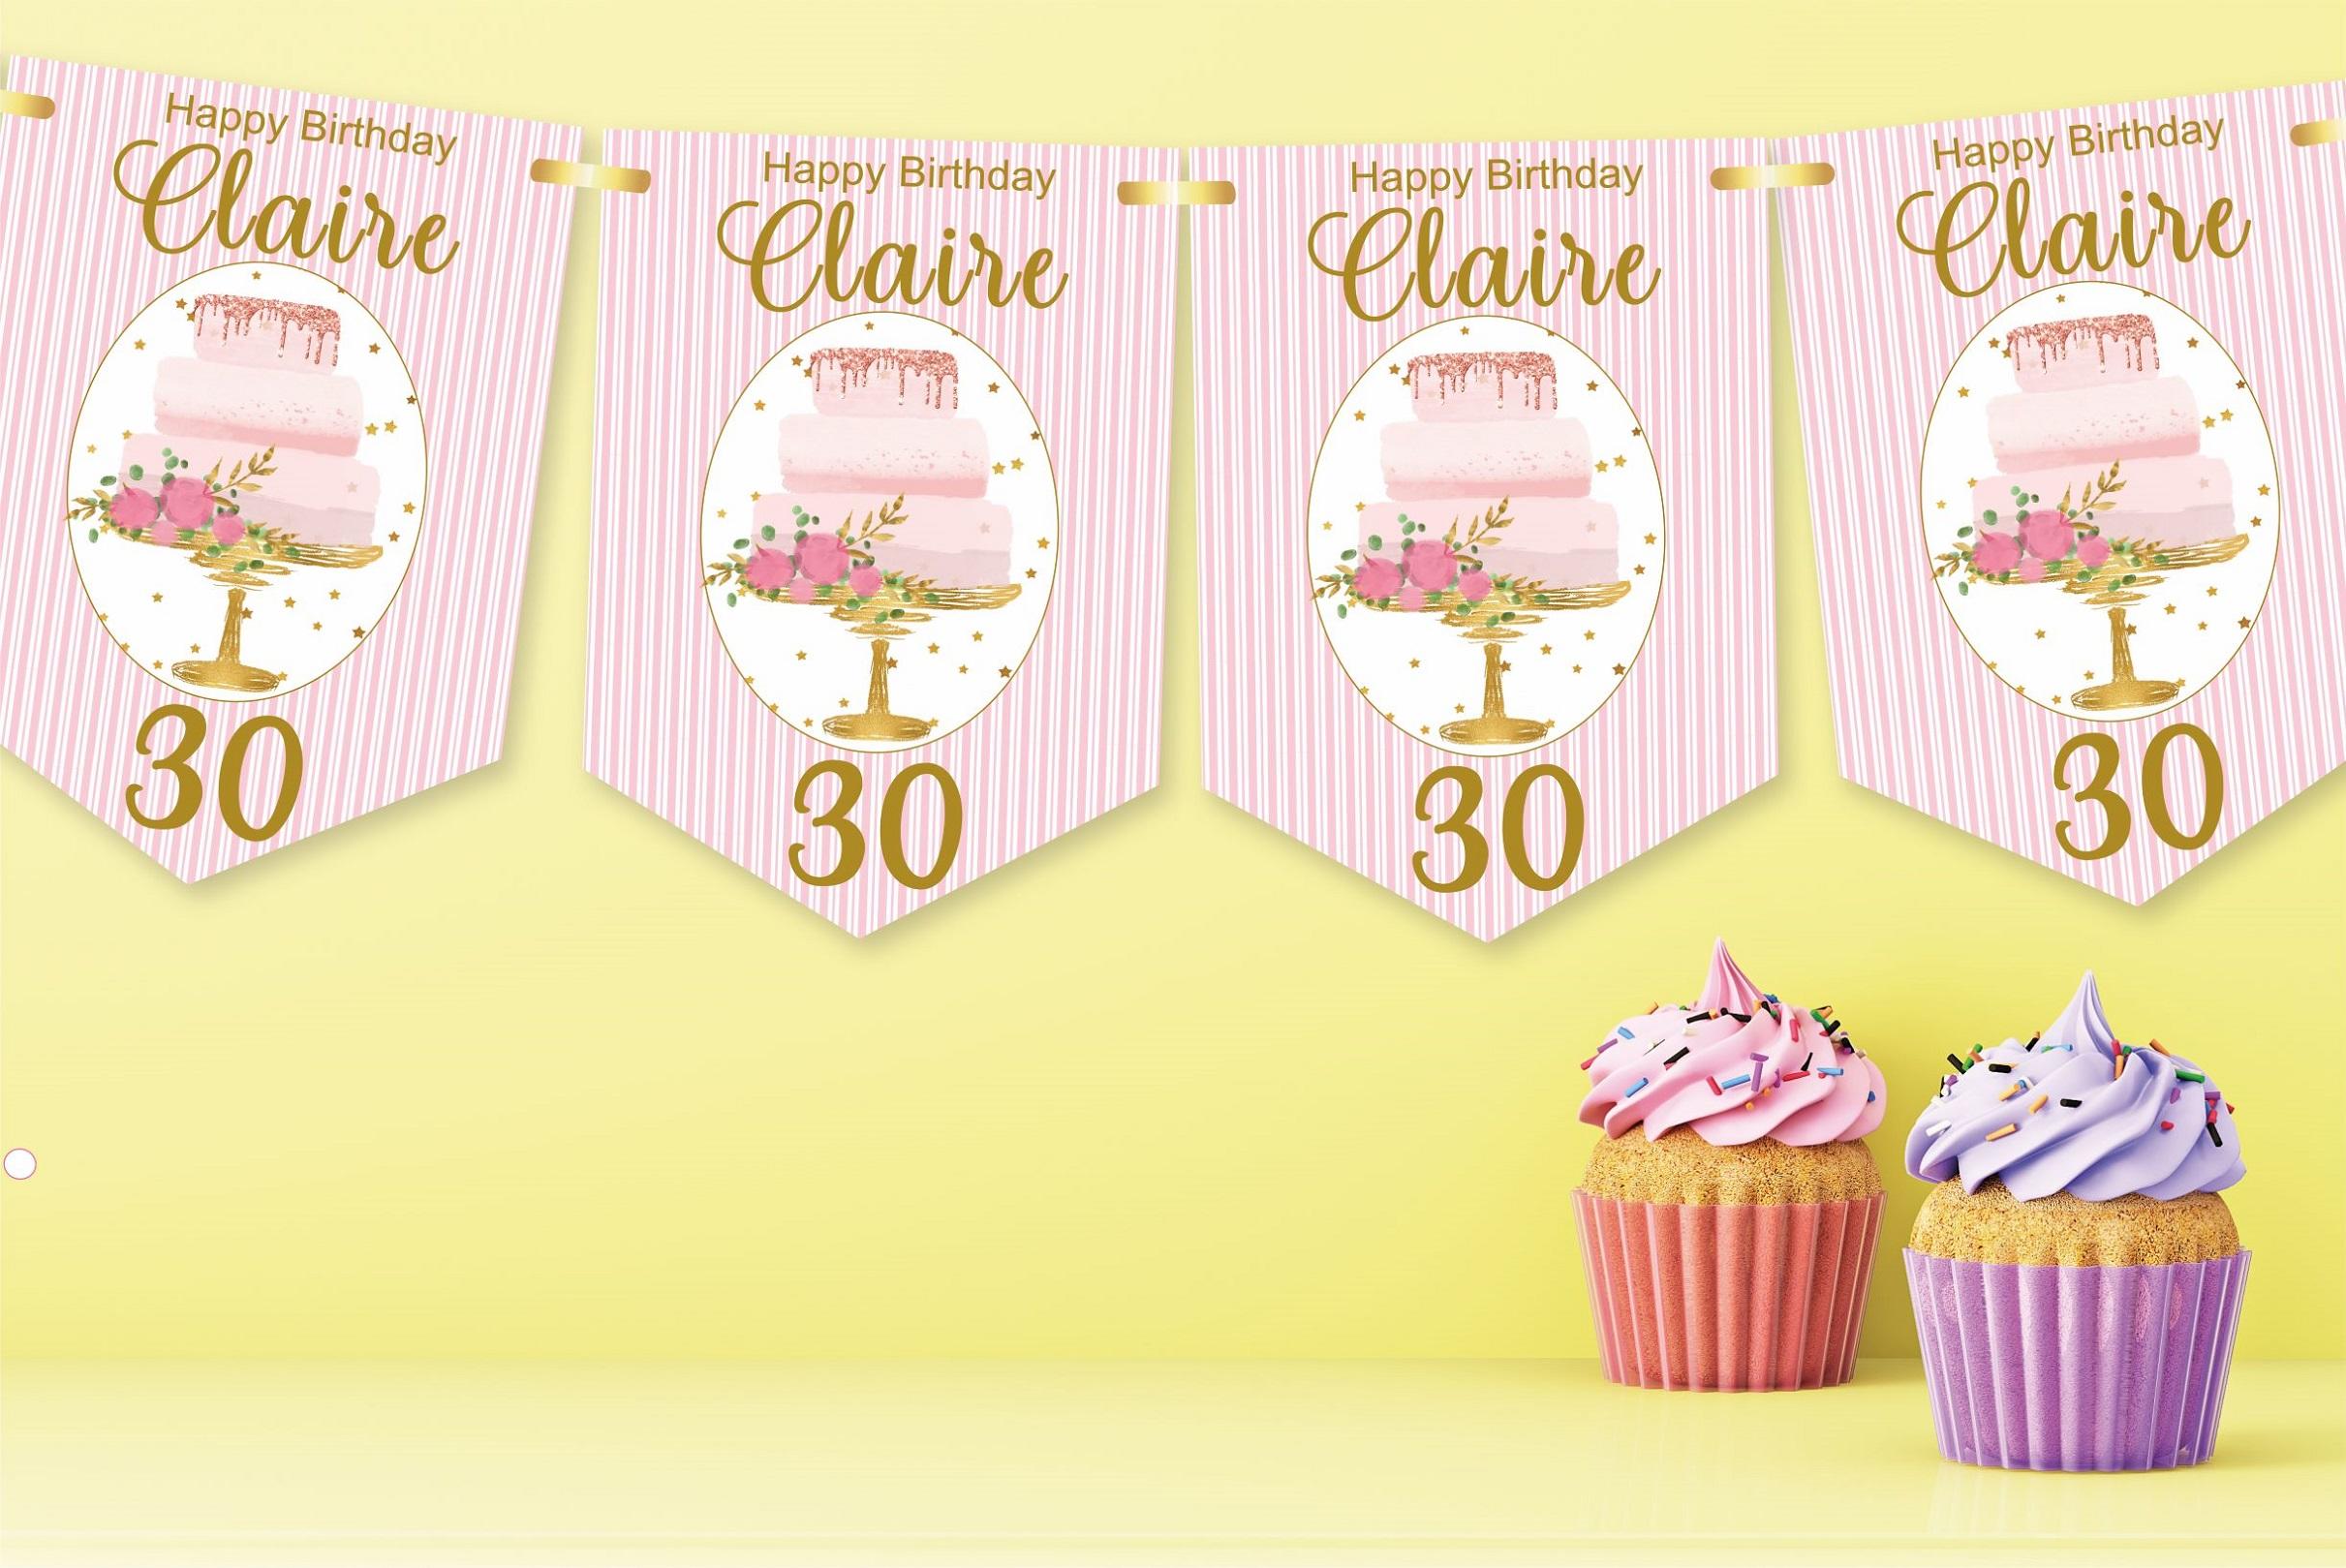 Birthday Cake Bunting,Personalised Birthday Banner,Any Name and Age